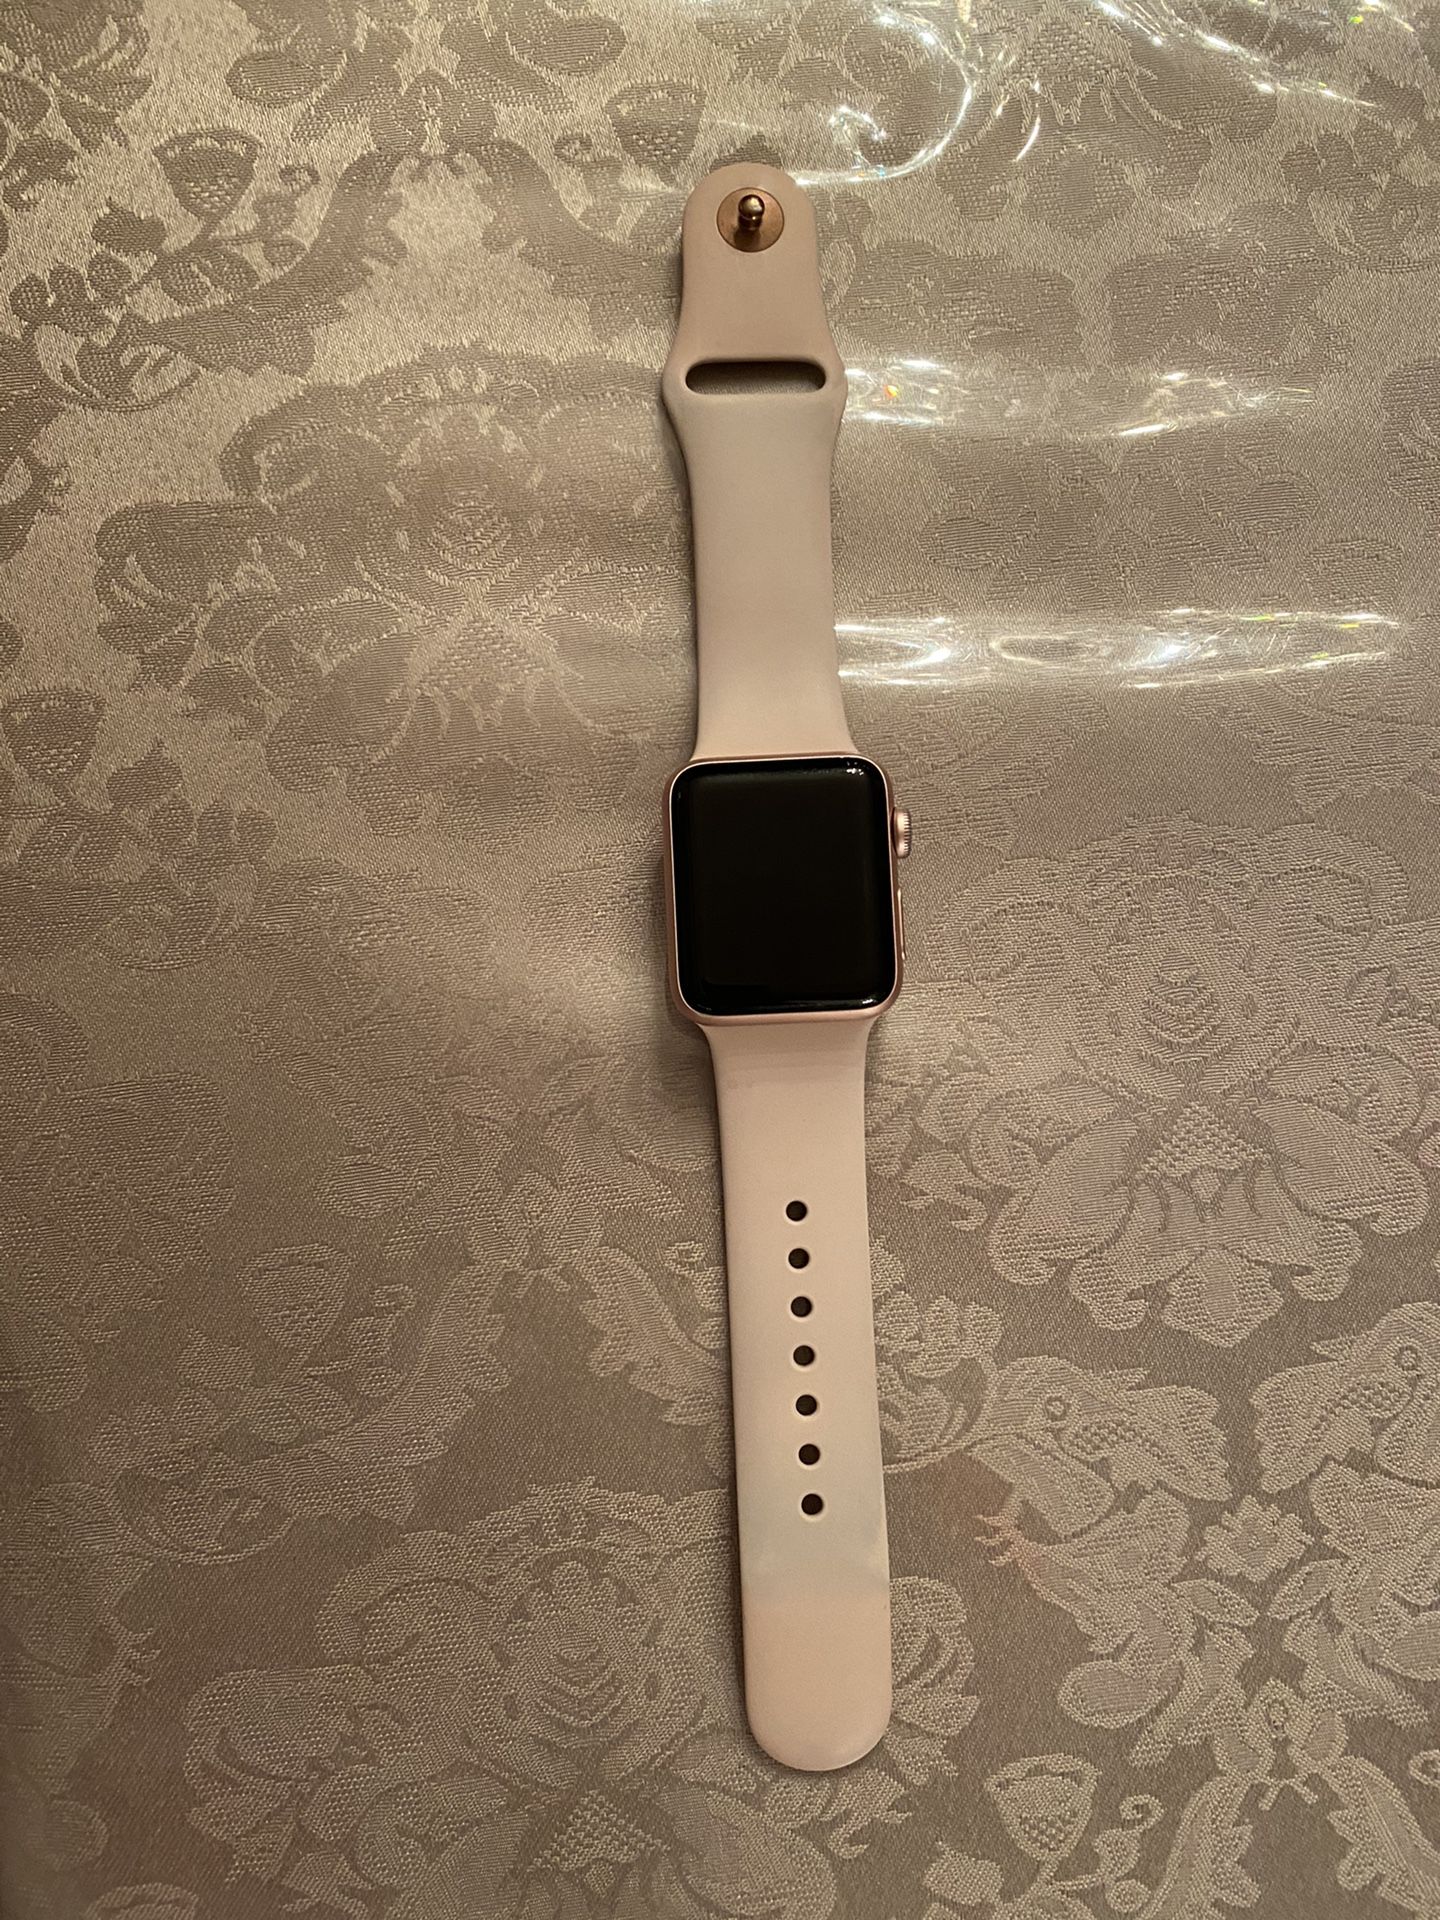 Apple watch series 2 great condition, works great. $100 obo